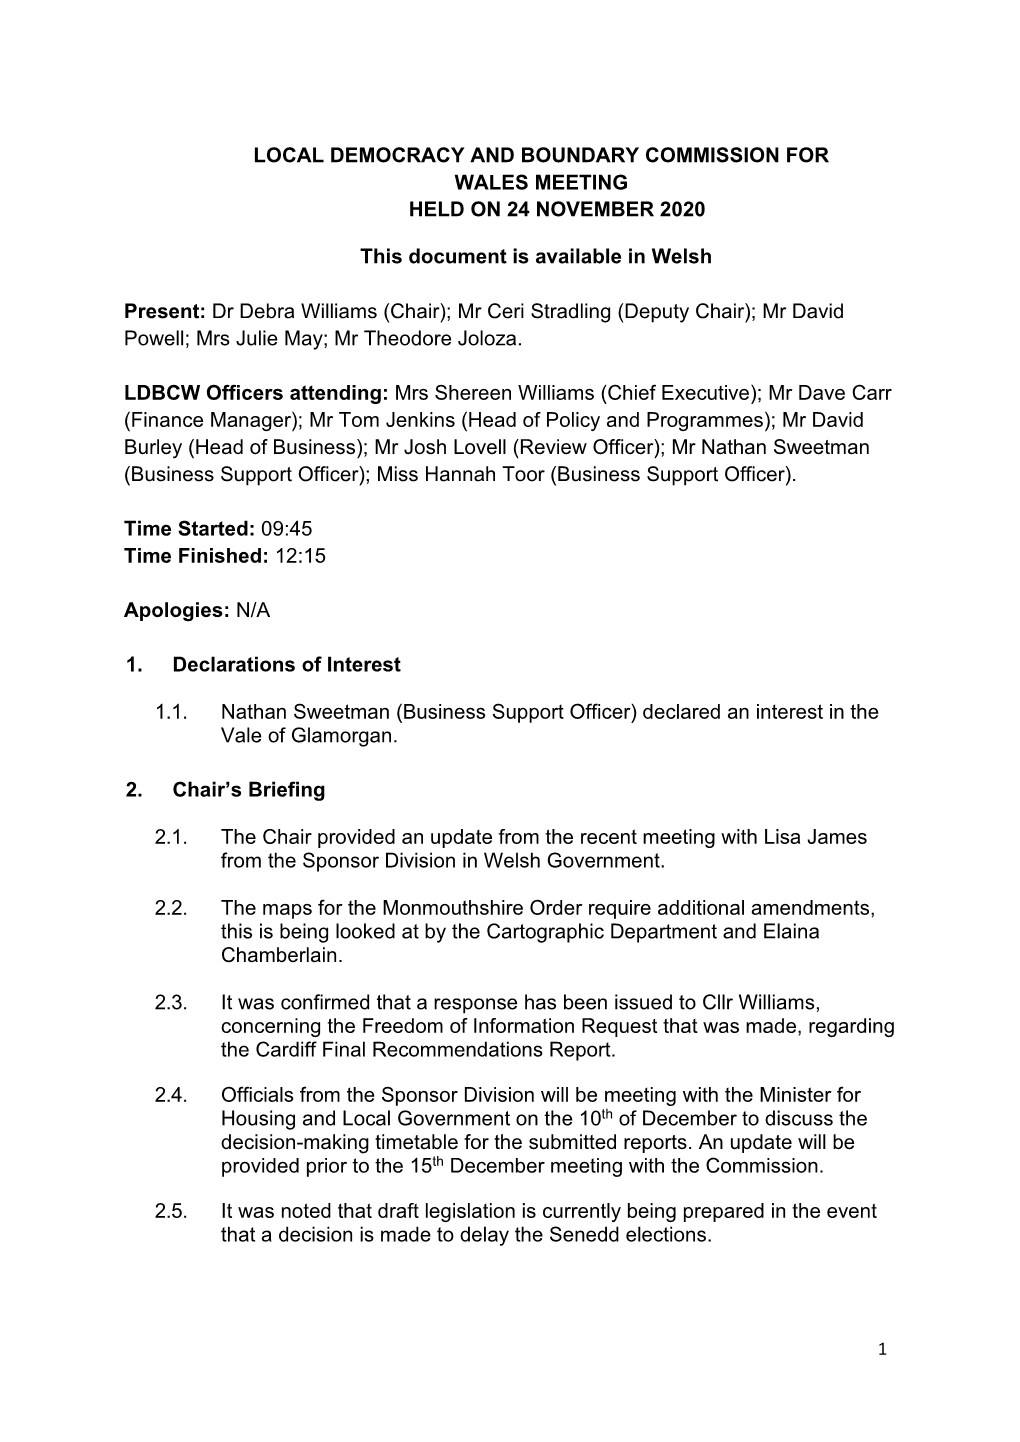 LOCAL DEMOCRACY and BOUNDARY COMMISSION for WALES MEETING HELD on 24 NOVEMBER 2020 This Document Is Available in Welsh Presen